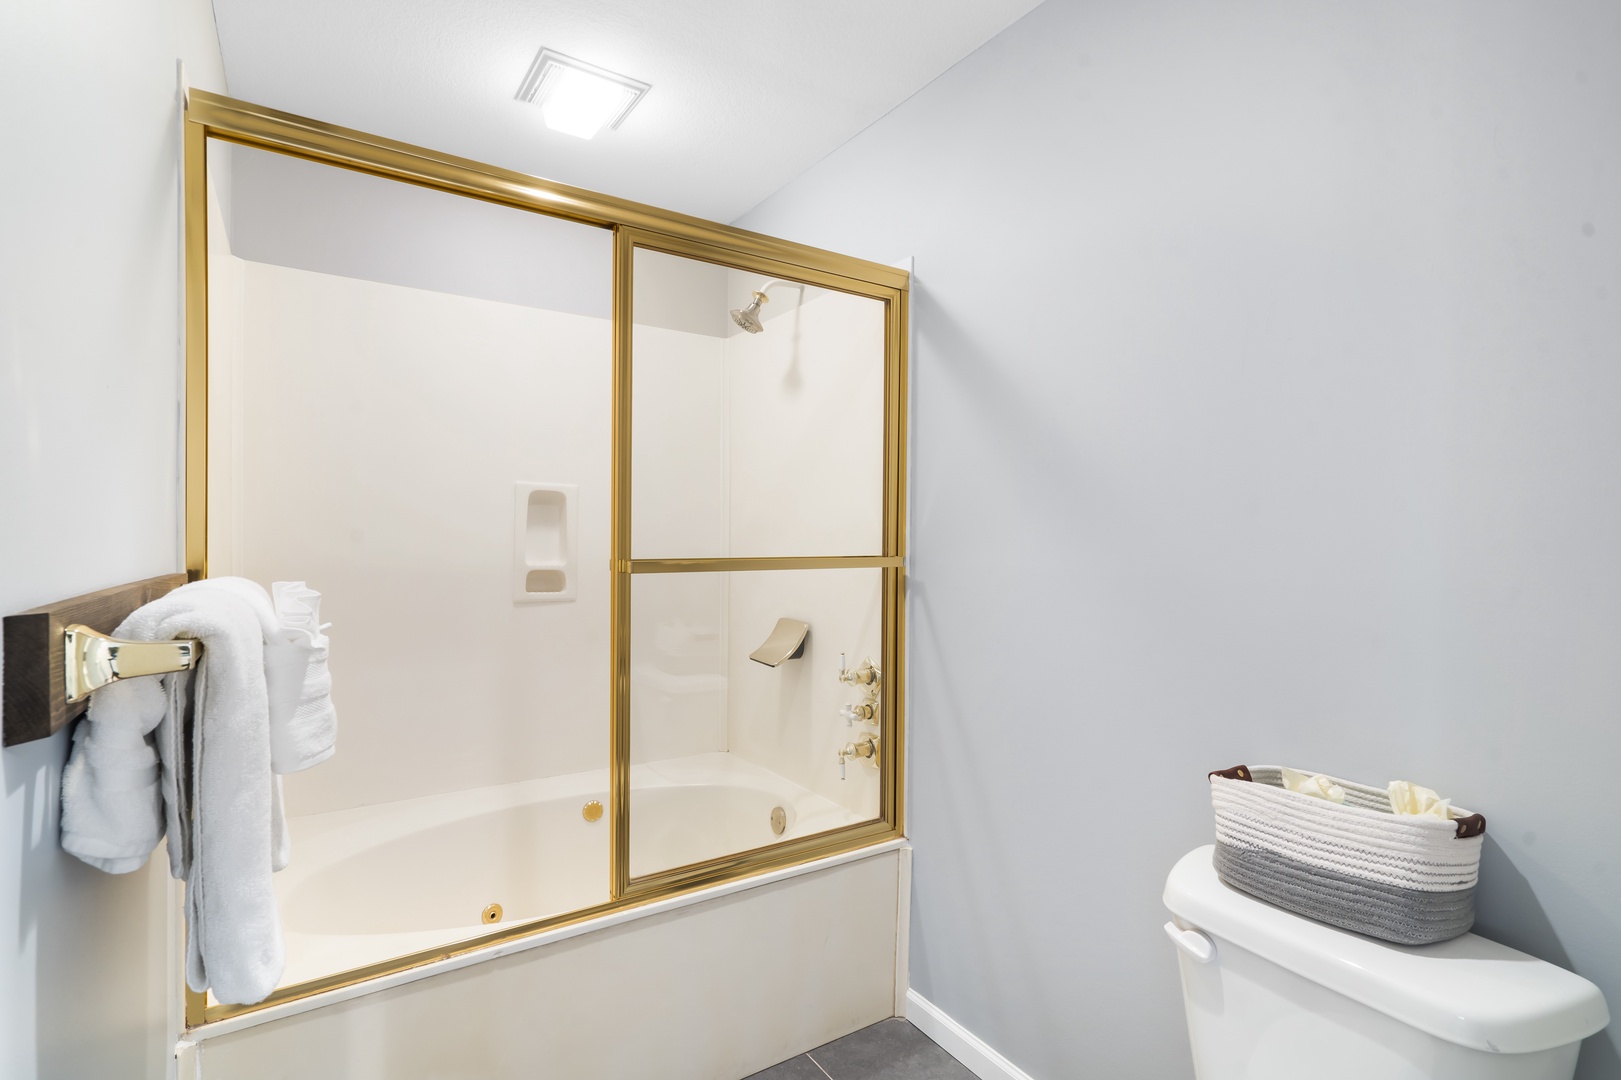 Dual vanities & a shower/tub combo await in the master ensuite bath